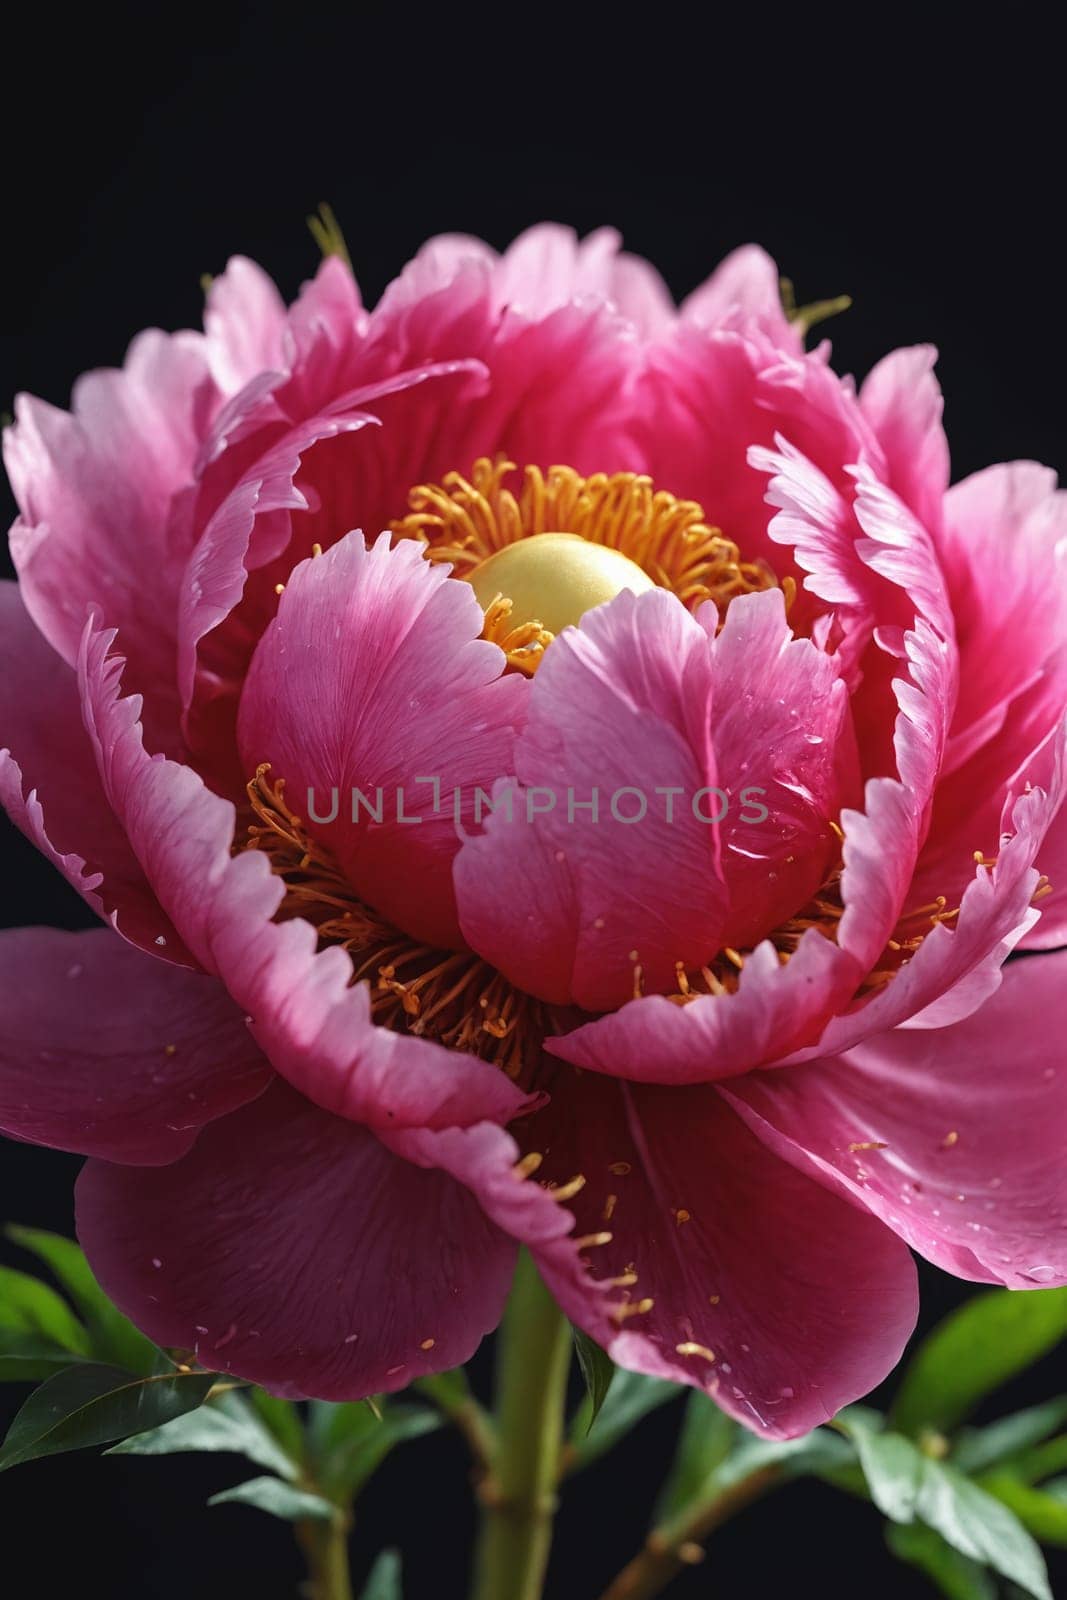 Summer's Symphony: A Close-Up of a Blooming Pink Peony by Andre1ns